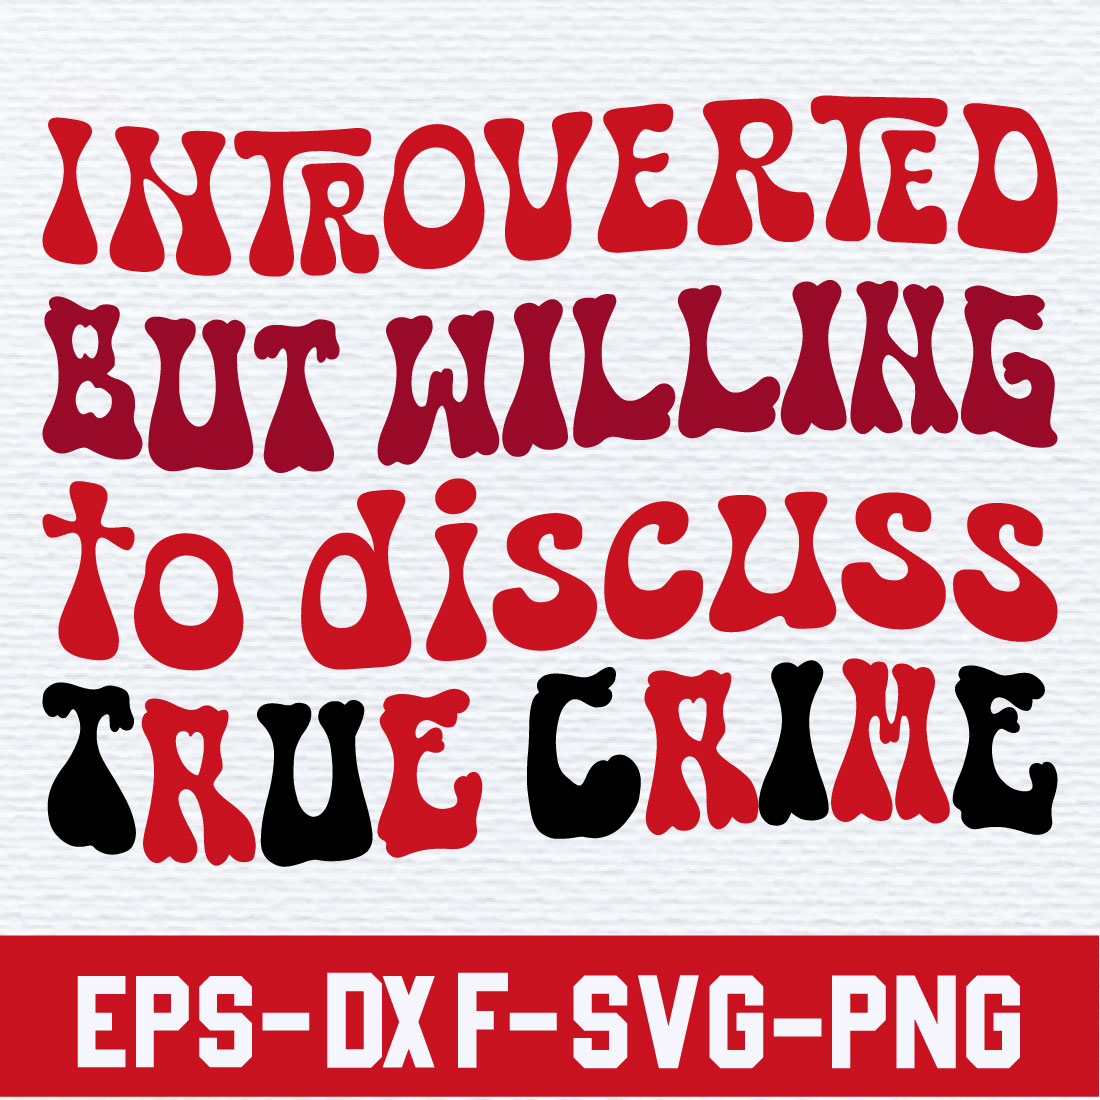 Introverted but willing to discuss True Crime cover image.